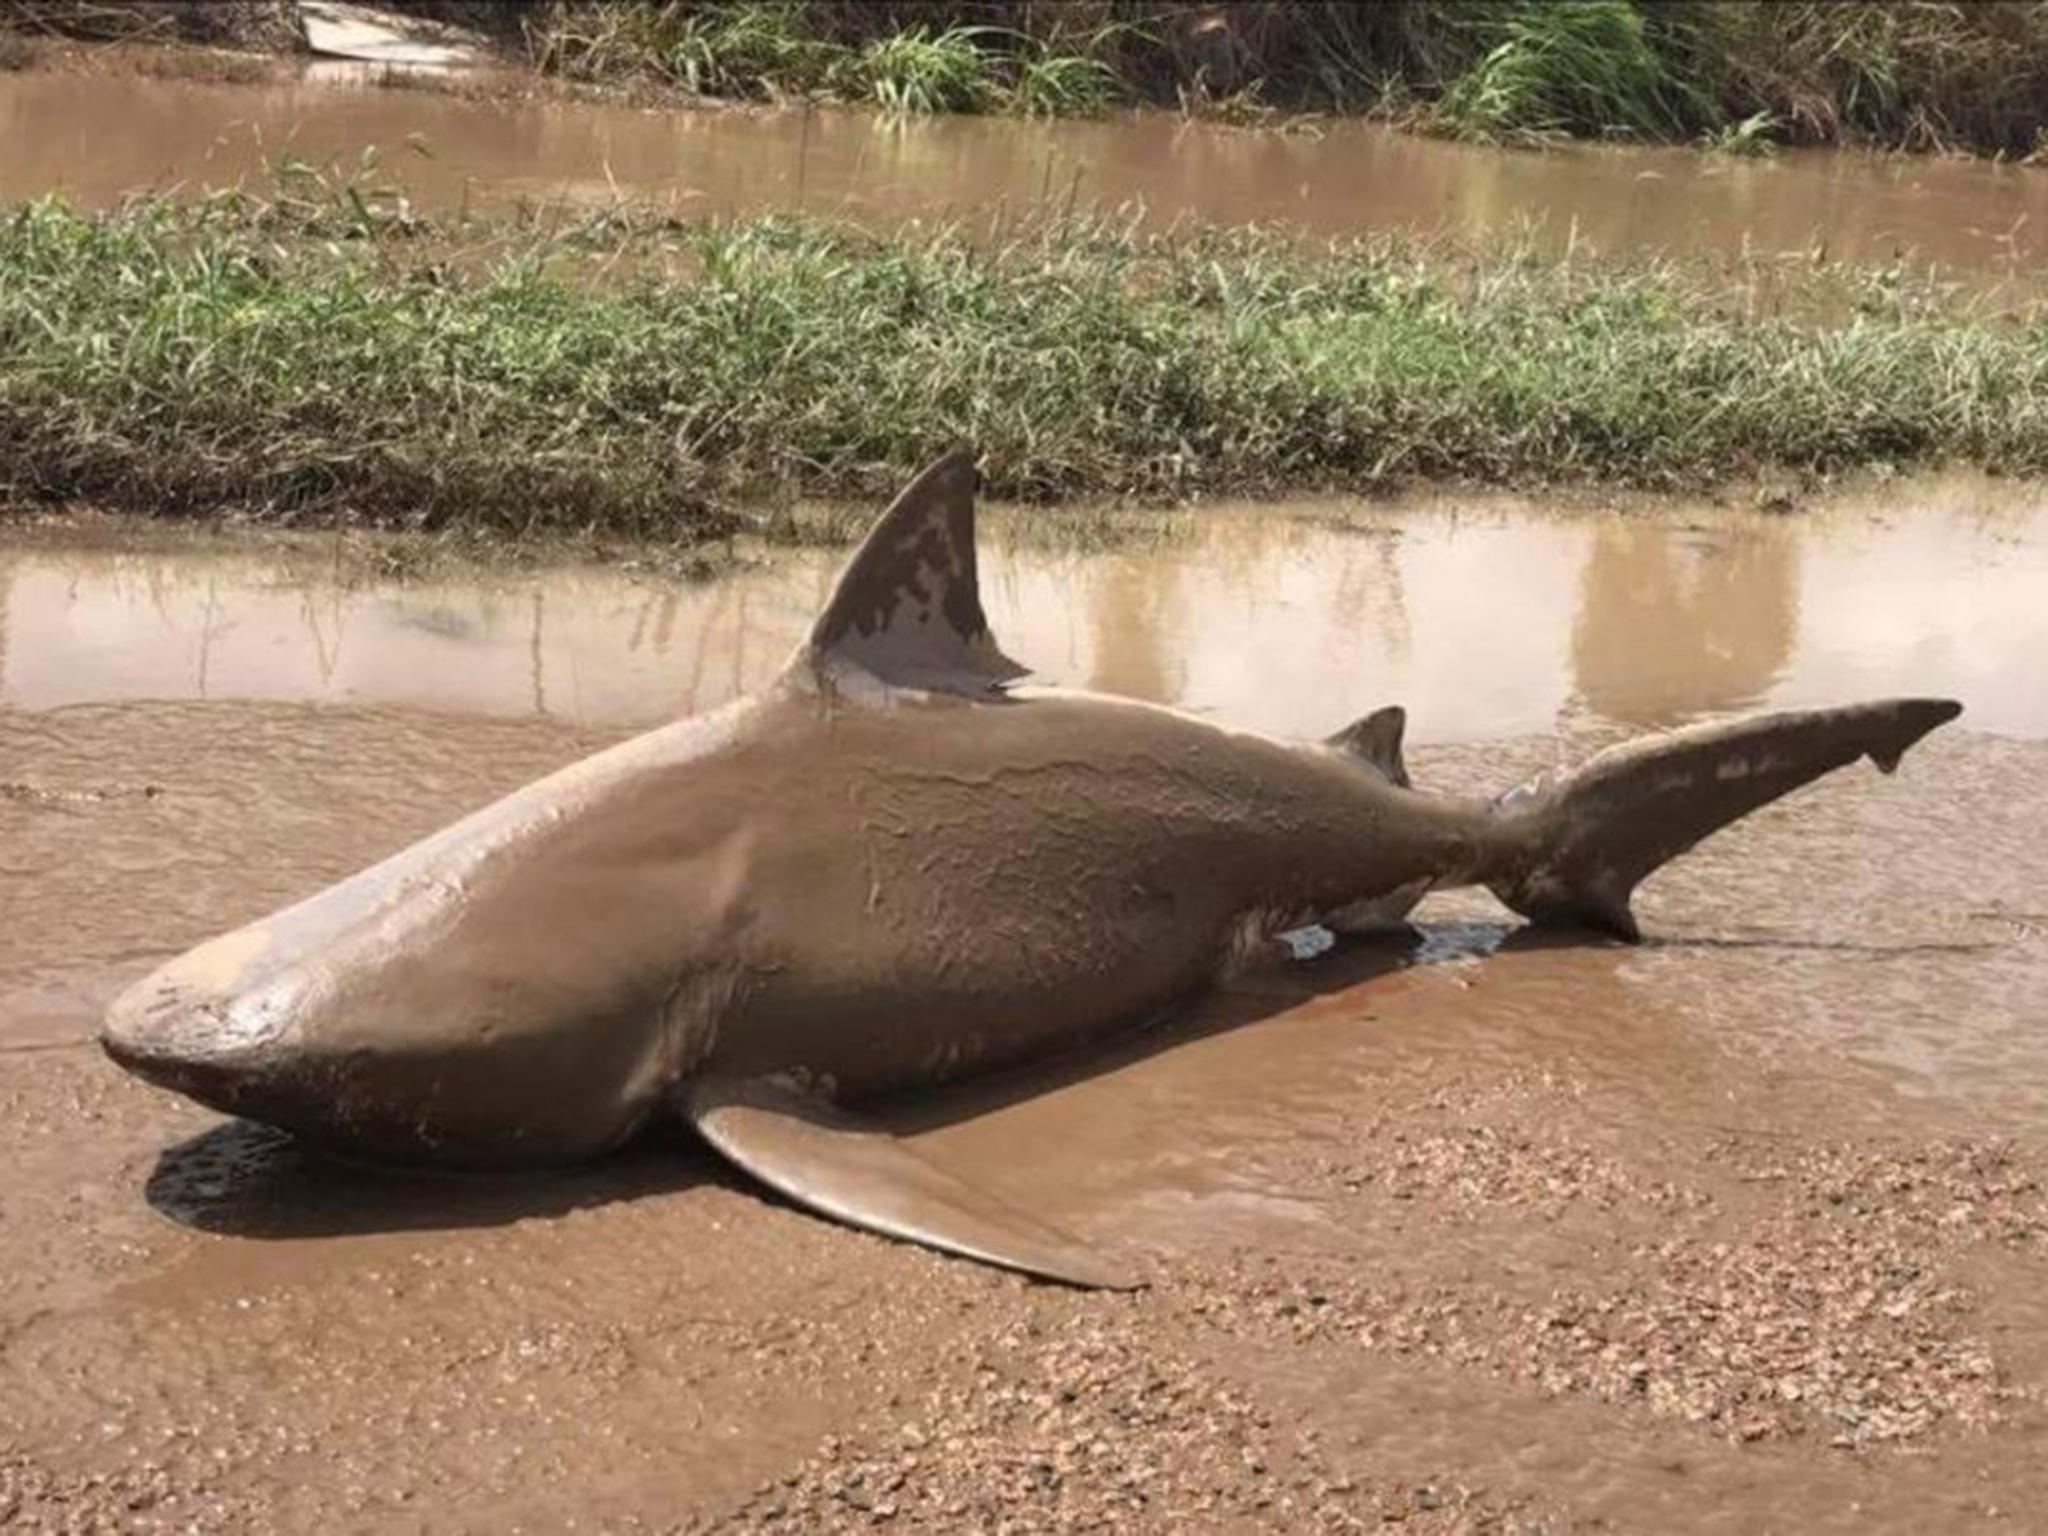 The shark was beached by Cyclone Debbie which struck the north east of Australia this week